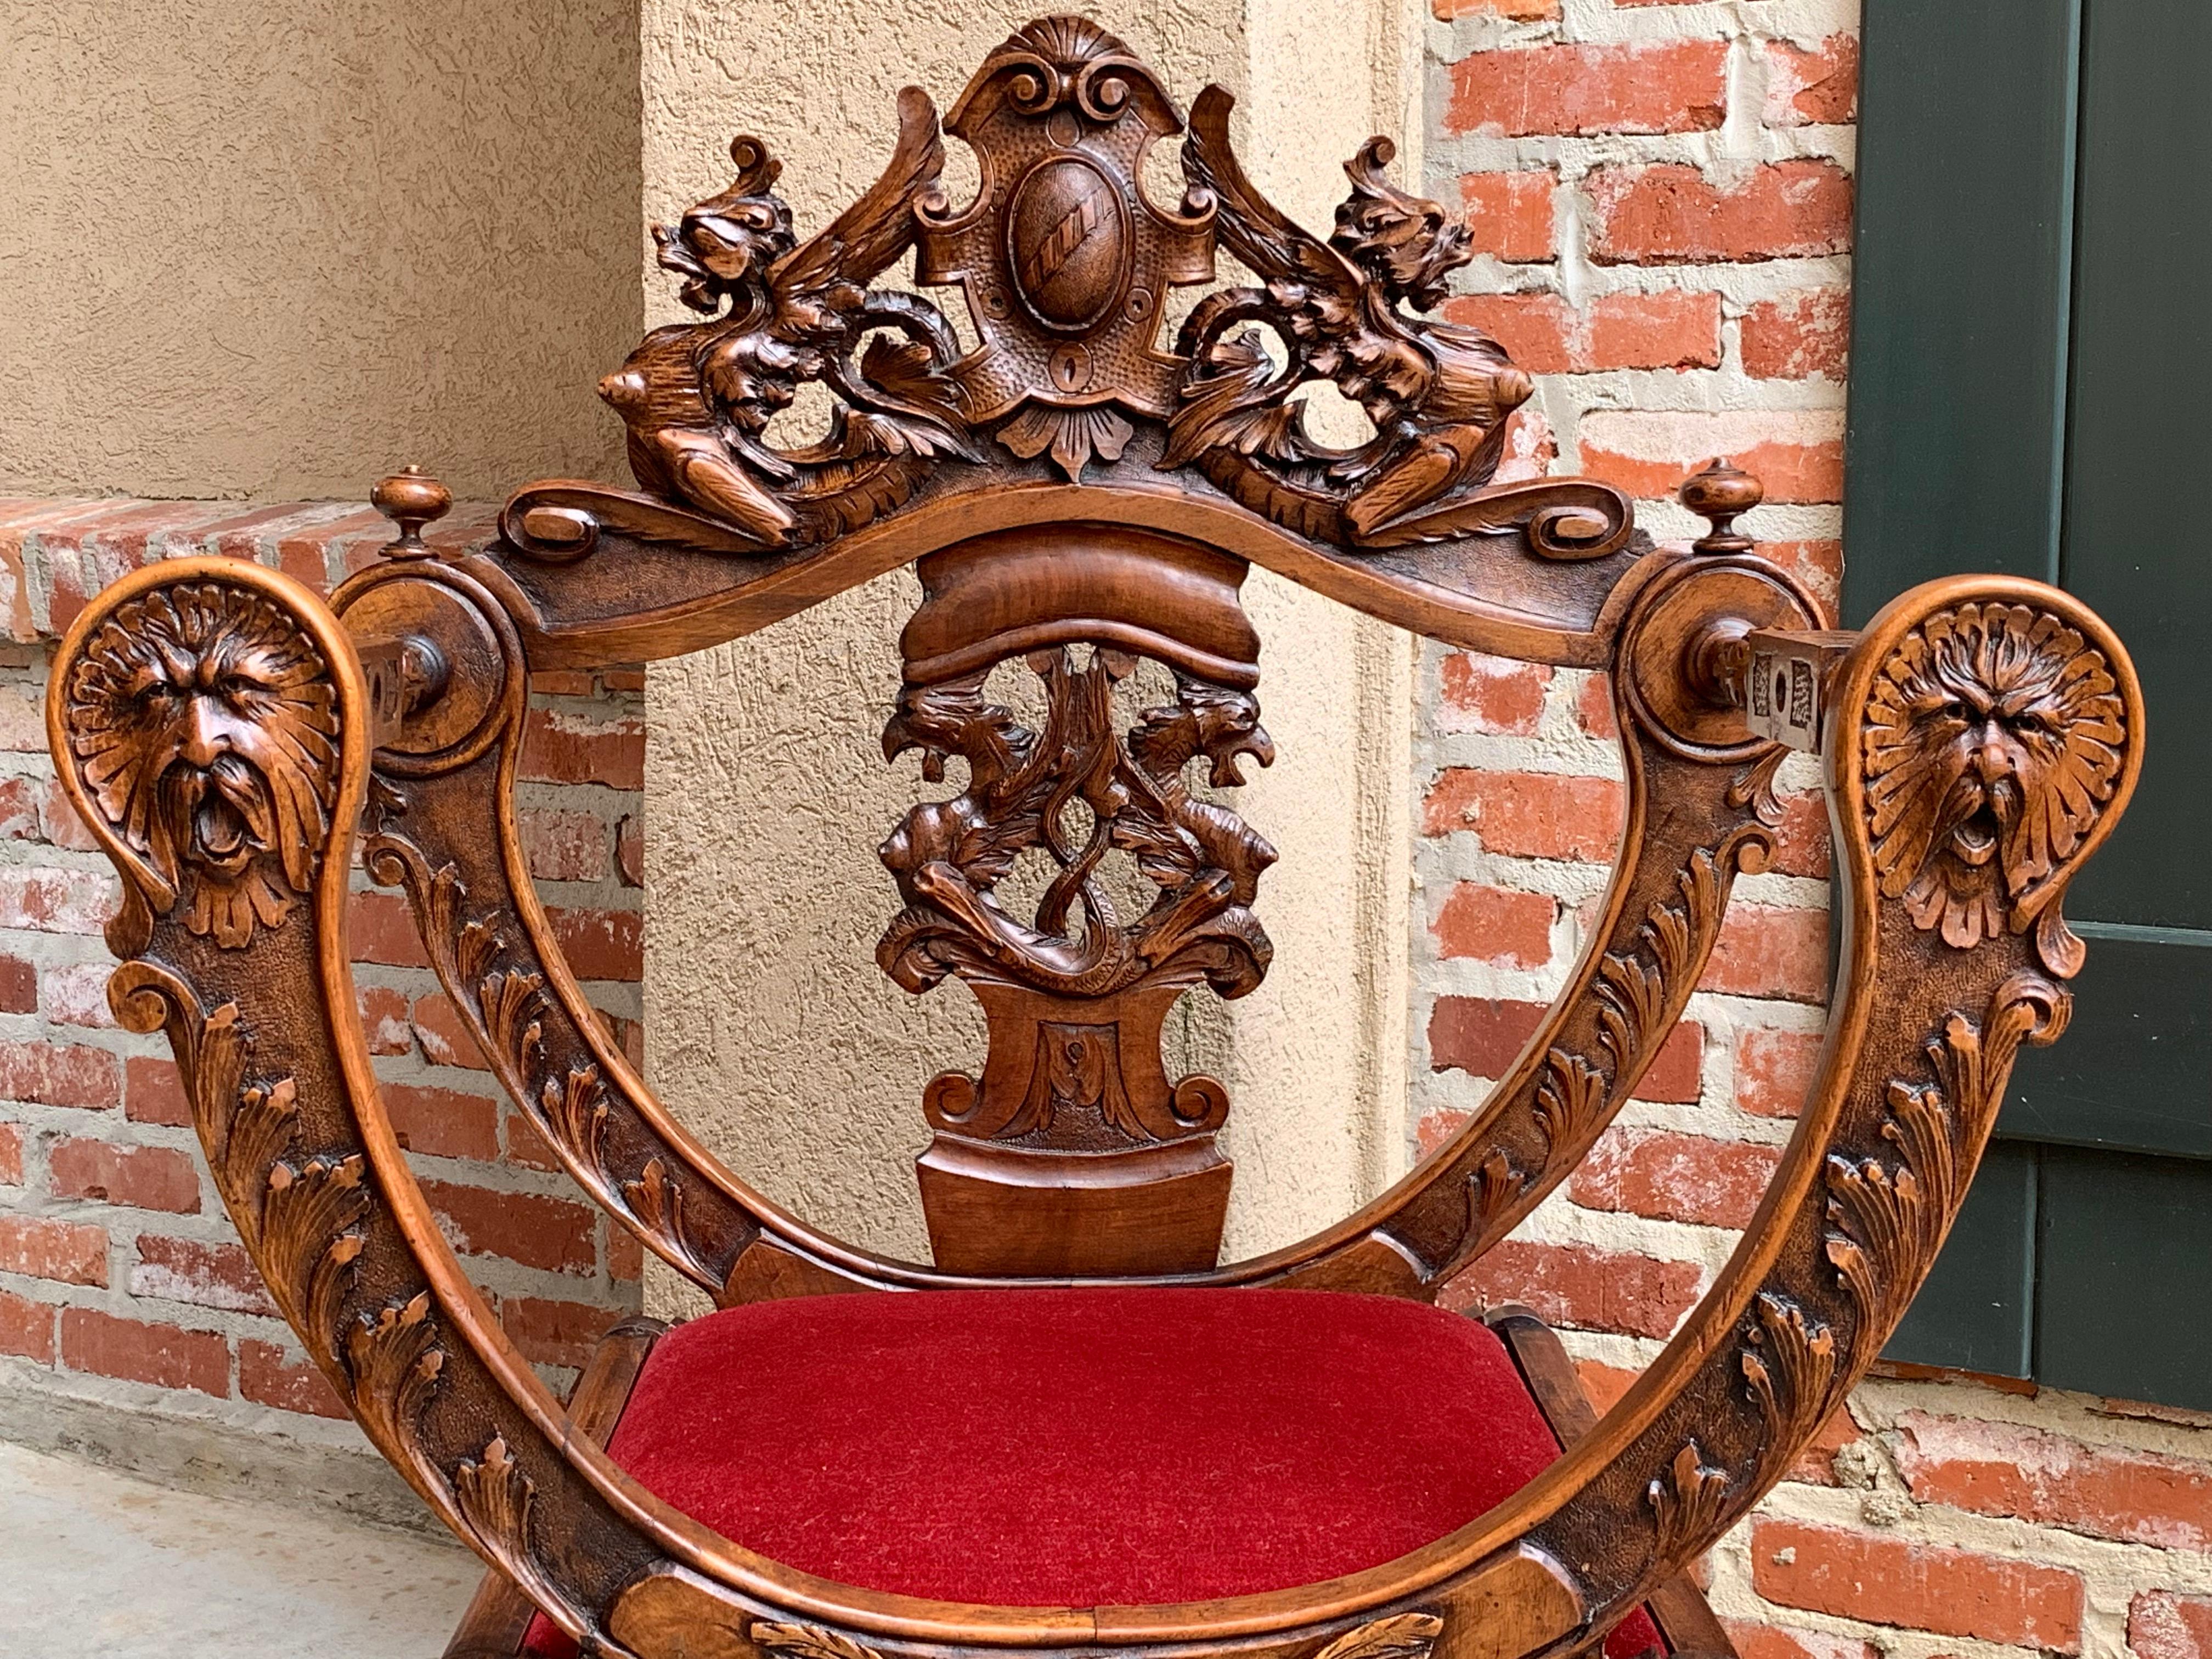 Hand-Carved 19th Century Antique French Carved Wood Dagobert Chair Curule Renaissance Throne